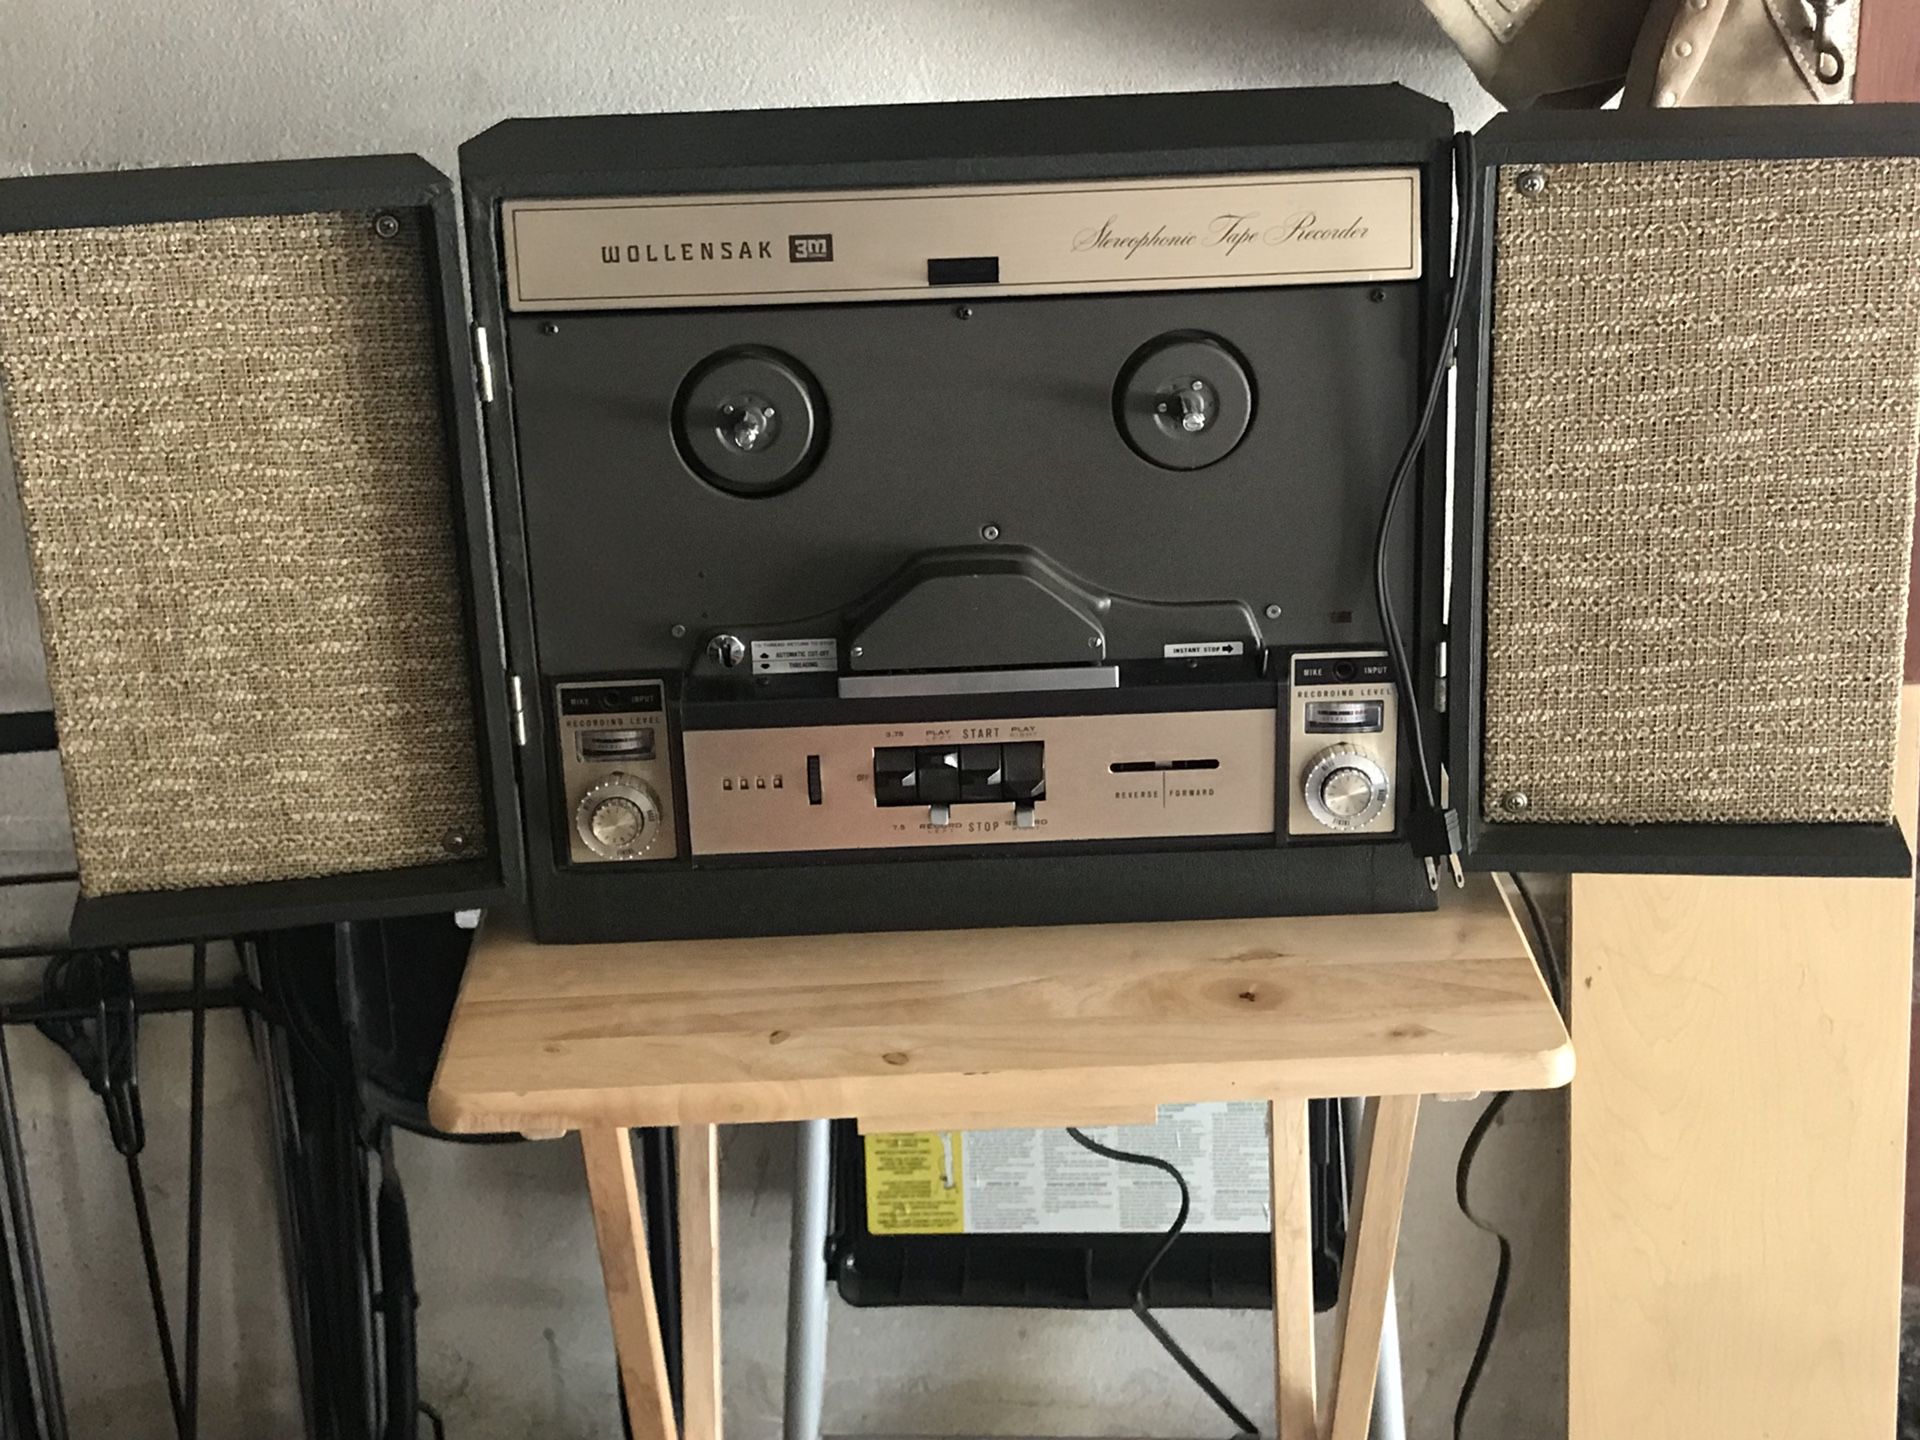 Wollensak reel to reel 3m recorder model 1280 selling for parts doesn't  turn on for Sale in Temple City, CA - OfferUp